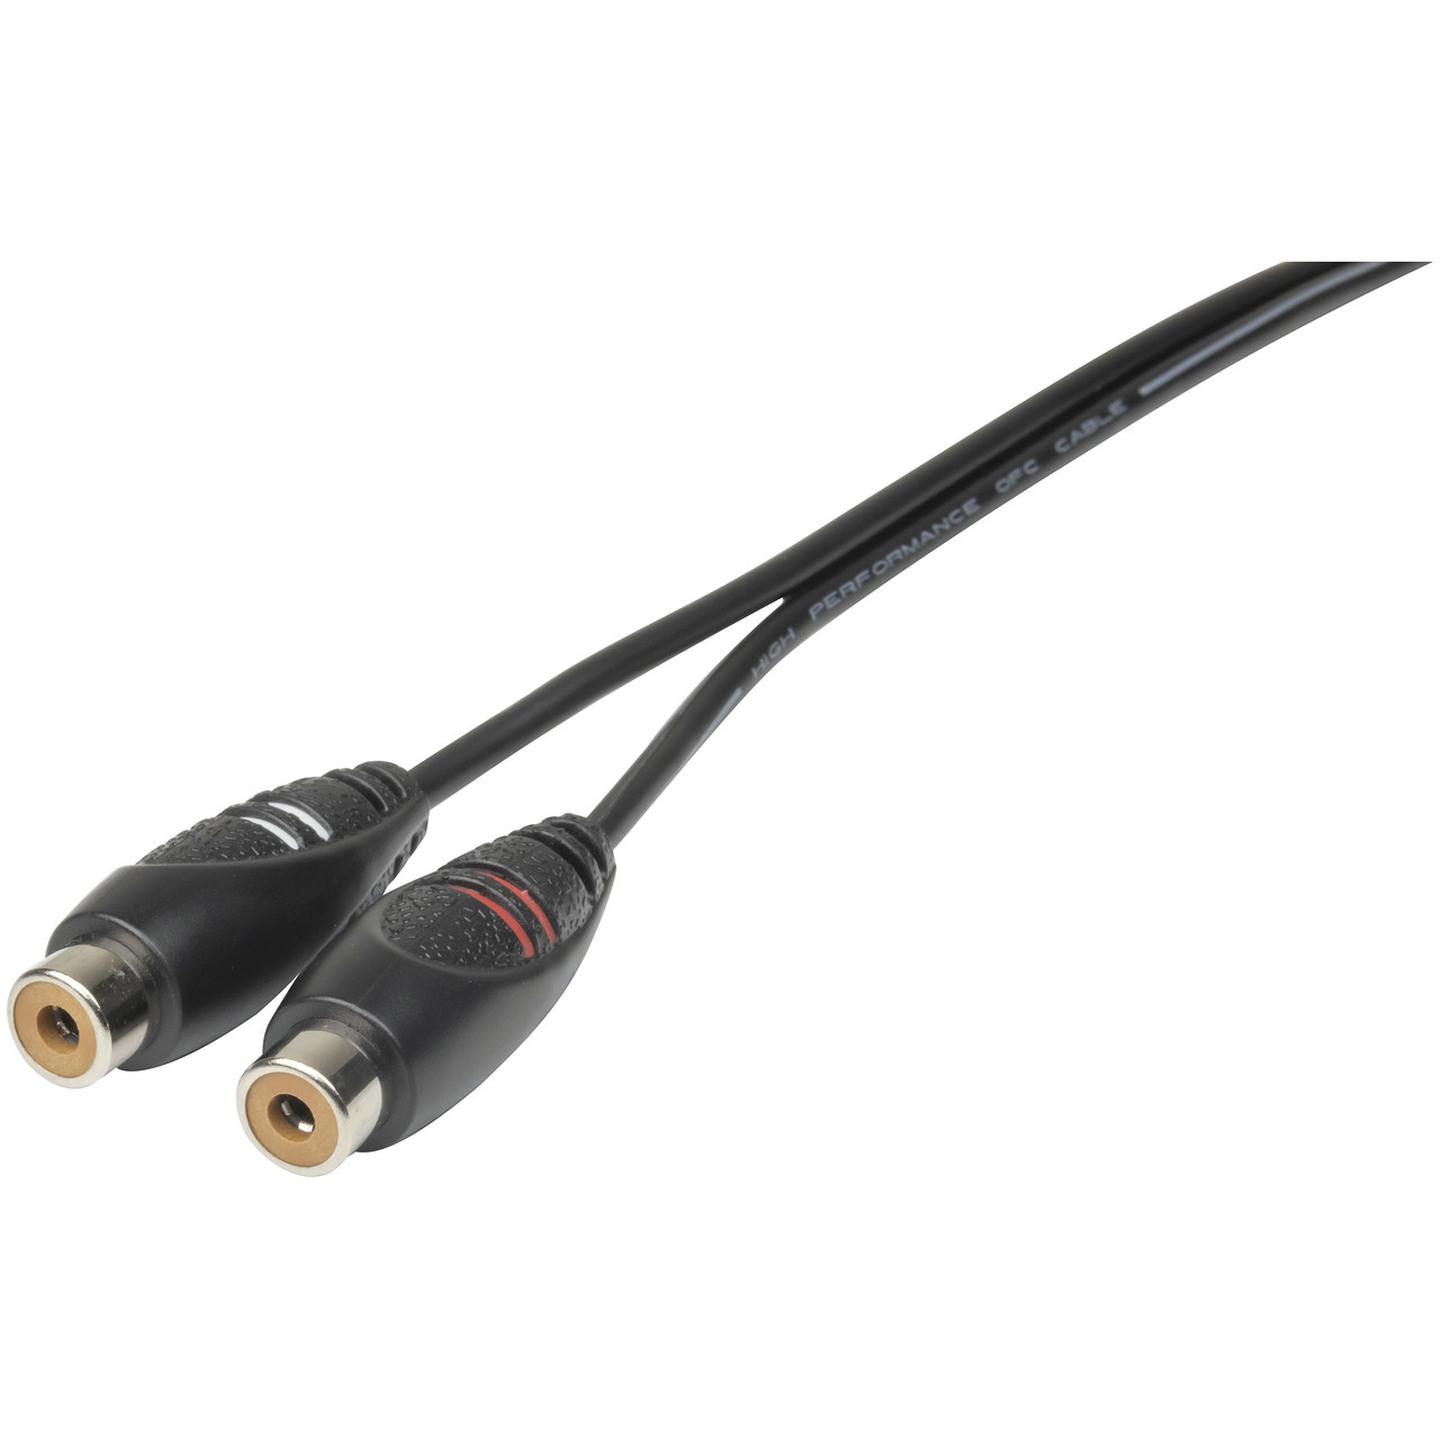 3.5mm Stereo Plug to 2 x RCA Sockets Audio Cable - 300mm